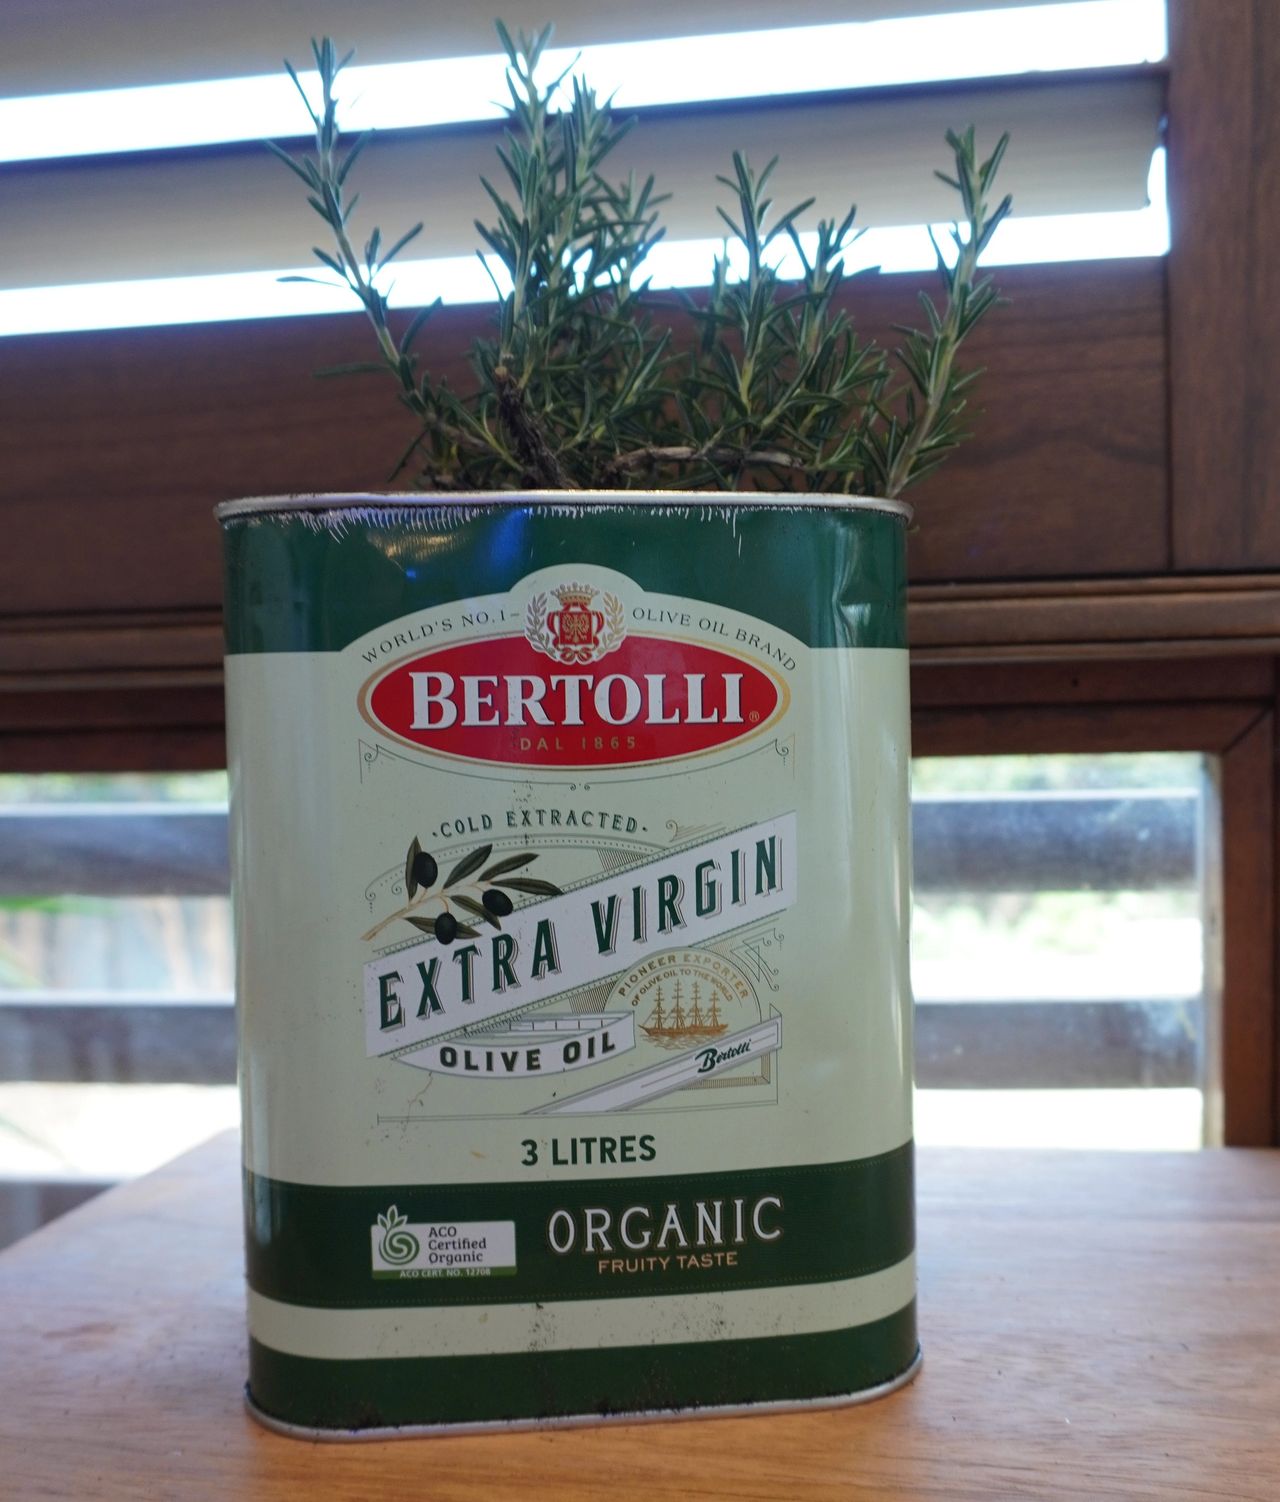 E.A.T.: How To: Make a Planter from an Olive Oil Can